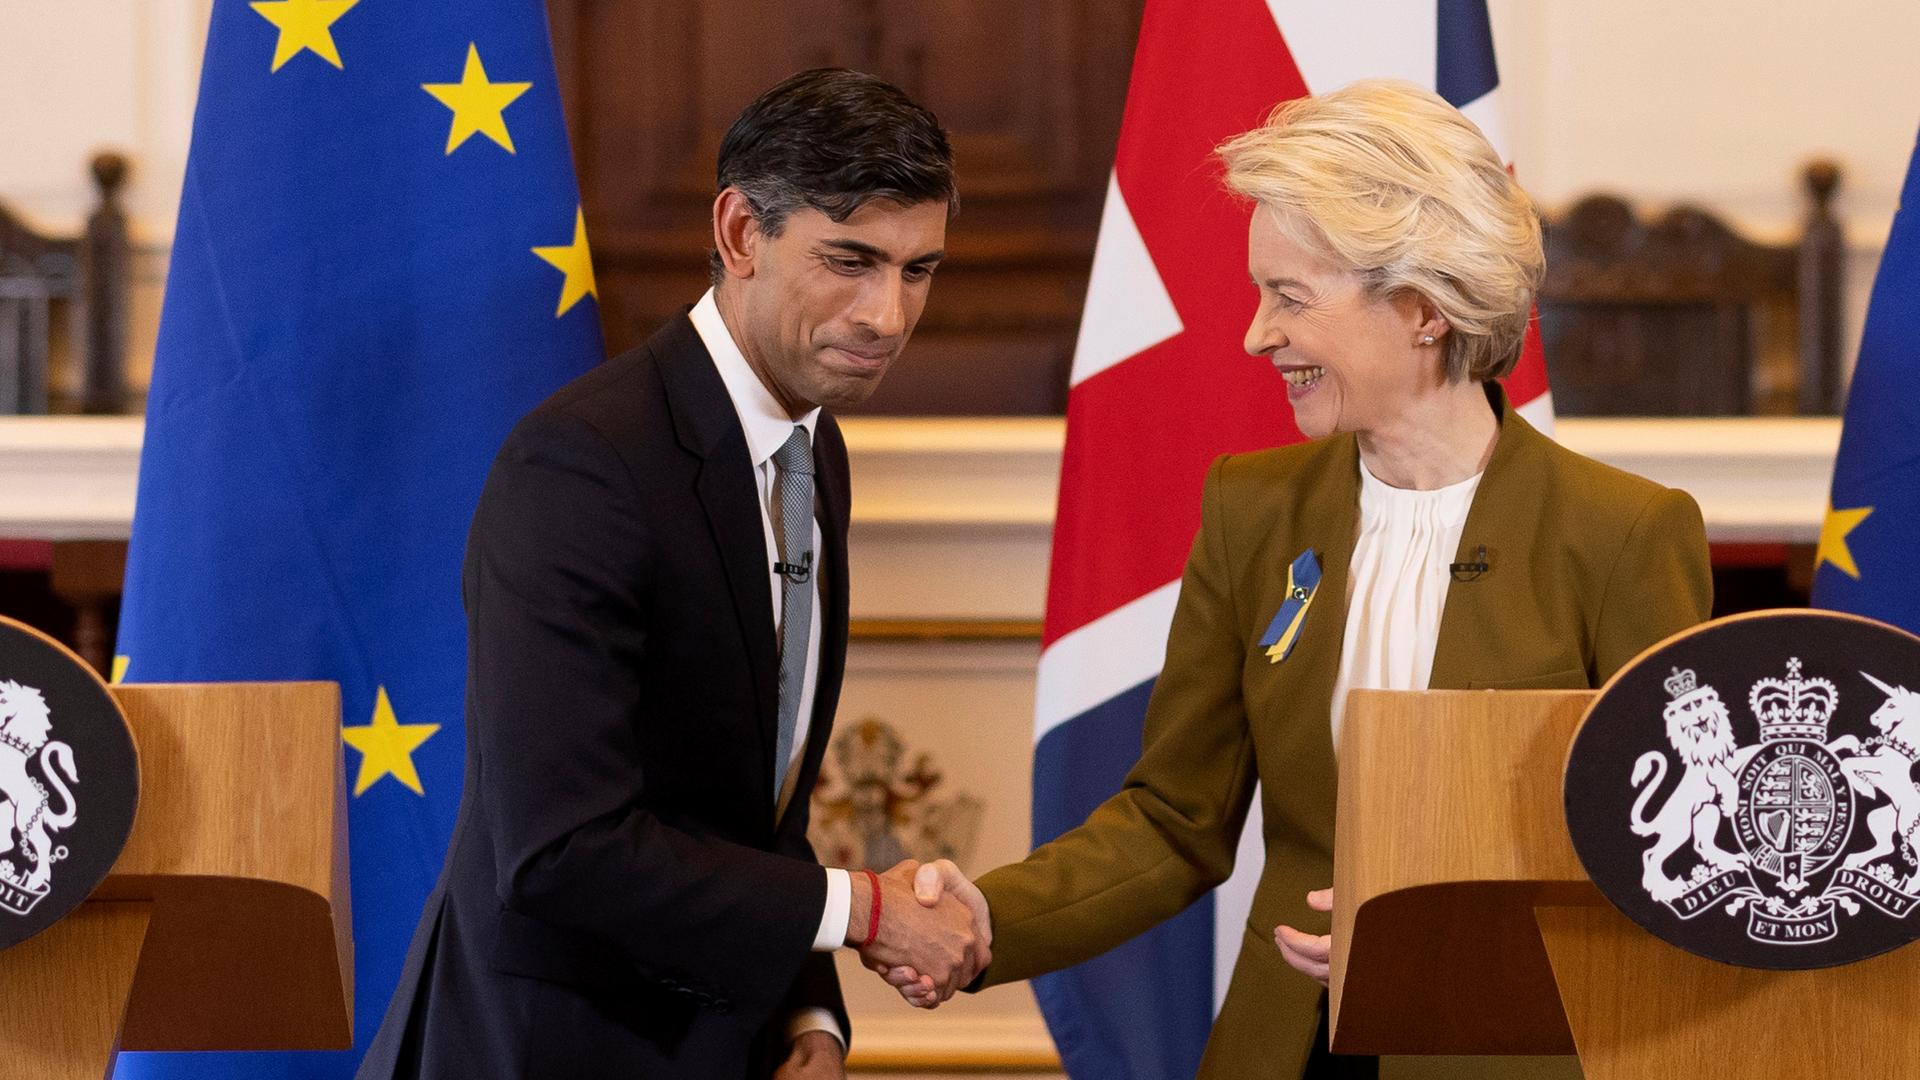 Britain's Prime Minister Rishi Sunak and EU Commission President Ursula von der Leyen, right, shake hands after a press conference at Windsor Guildhall, Windsor, England, Monday Feb. 27, 2023. The U.K. and the European Union ended years of wrangling and acrimony on Monday, sealing a deal to resolve their thorny post-Brexit trade dispute over Northern Ireland.